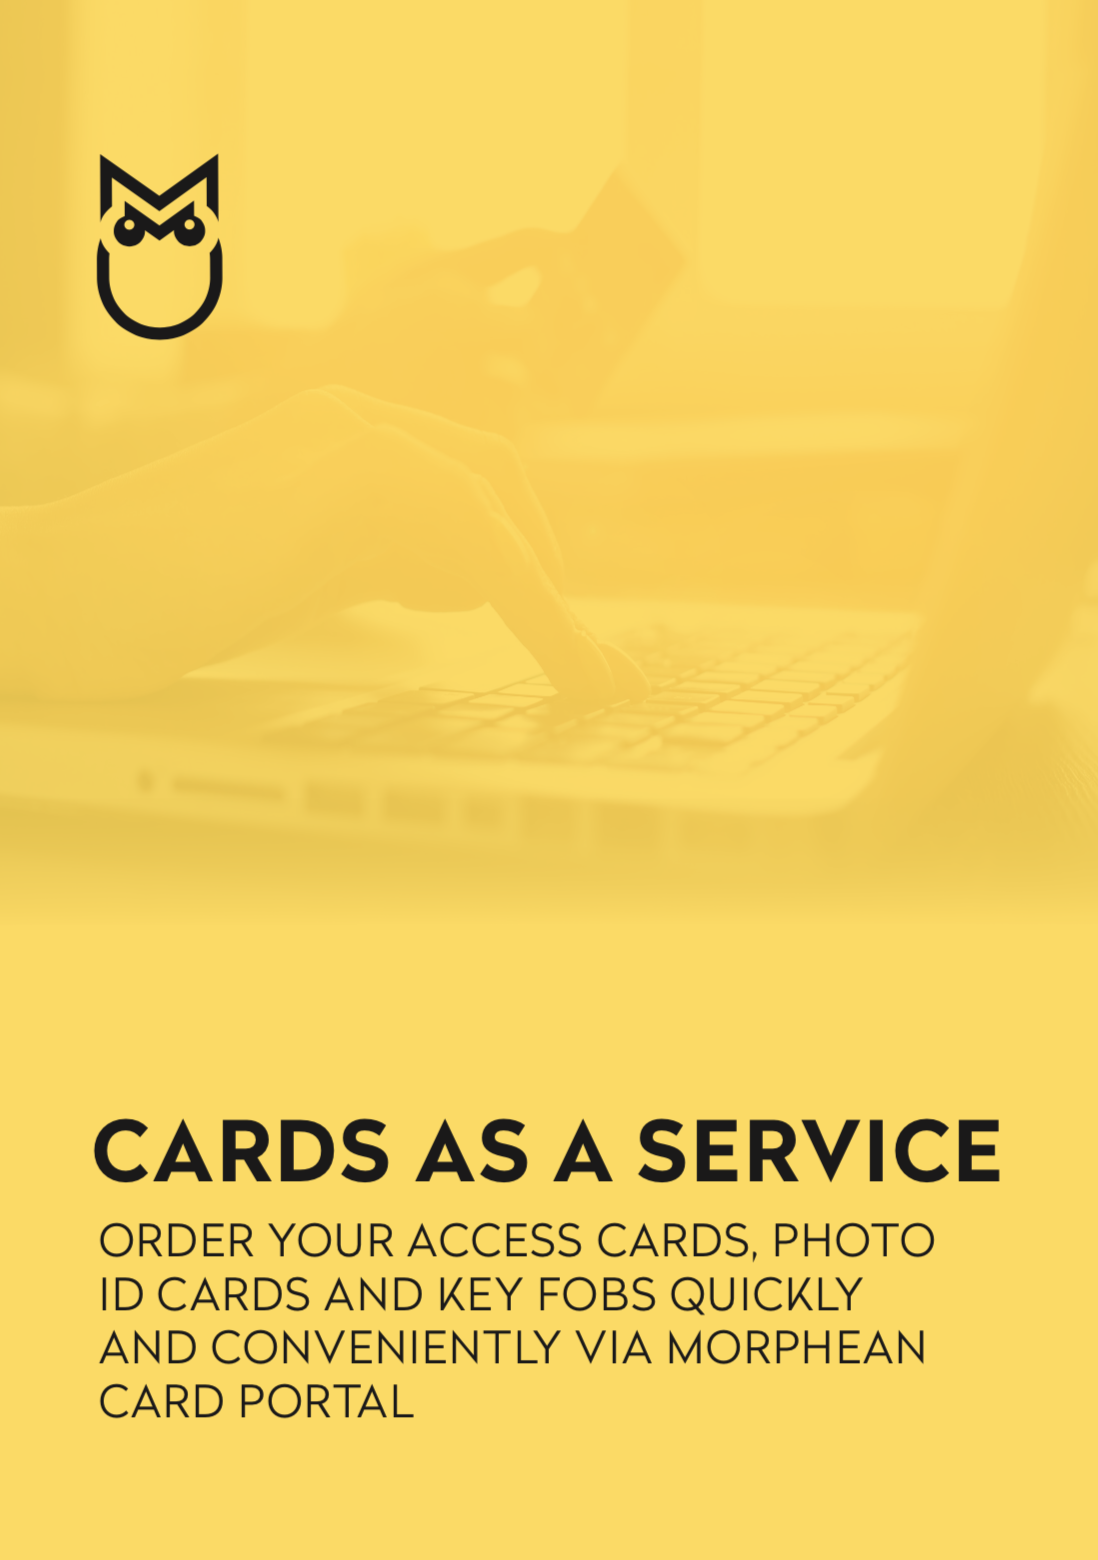 Download Access Cards as a Service  - Morphean